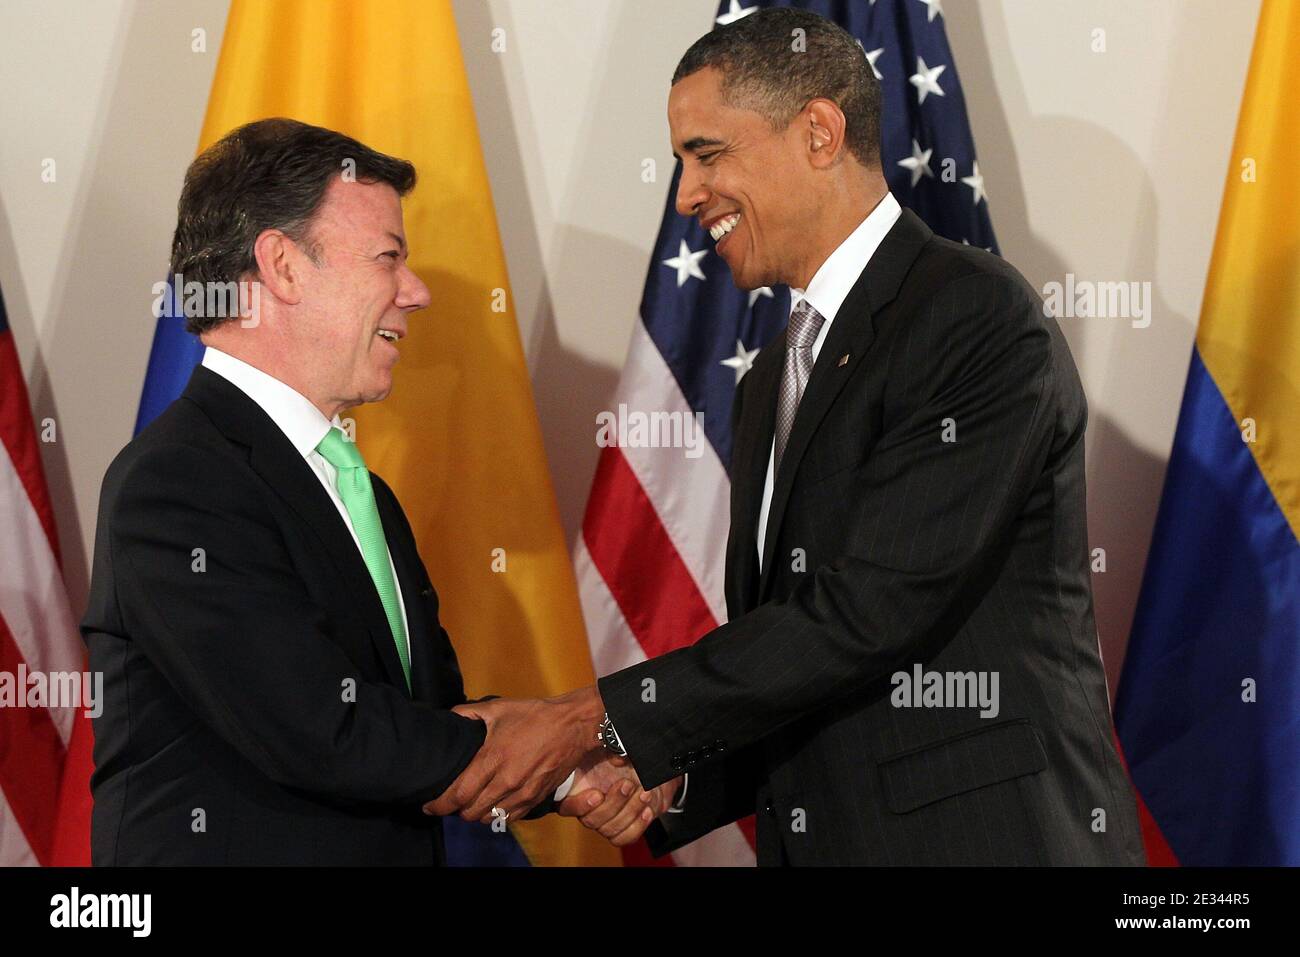 U.S. President Barack Obama (R) shakes hands with President Juan Manuel Santos Calderon of Colombia at a bilateral meeting New York City, NY, USA on September 24, 2010. Obama has been in New York since Wednesday attending the annual General Assembly at the United Nations, where yesterday he stressed the need for a resolution between Israel and Palestine, and a renewed international effort to keep Iran from attaining nuclear weapons. Photo by Spencer Platt/ABACAPRESS.COM (Pictured: Barack Obama, Juan Manuel Santos Calderon) Stock Photo